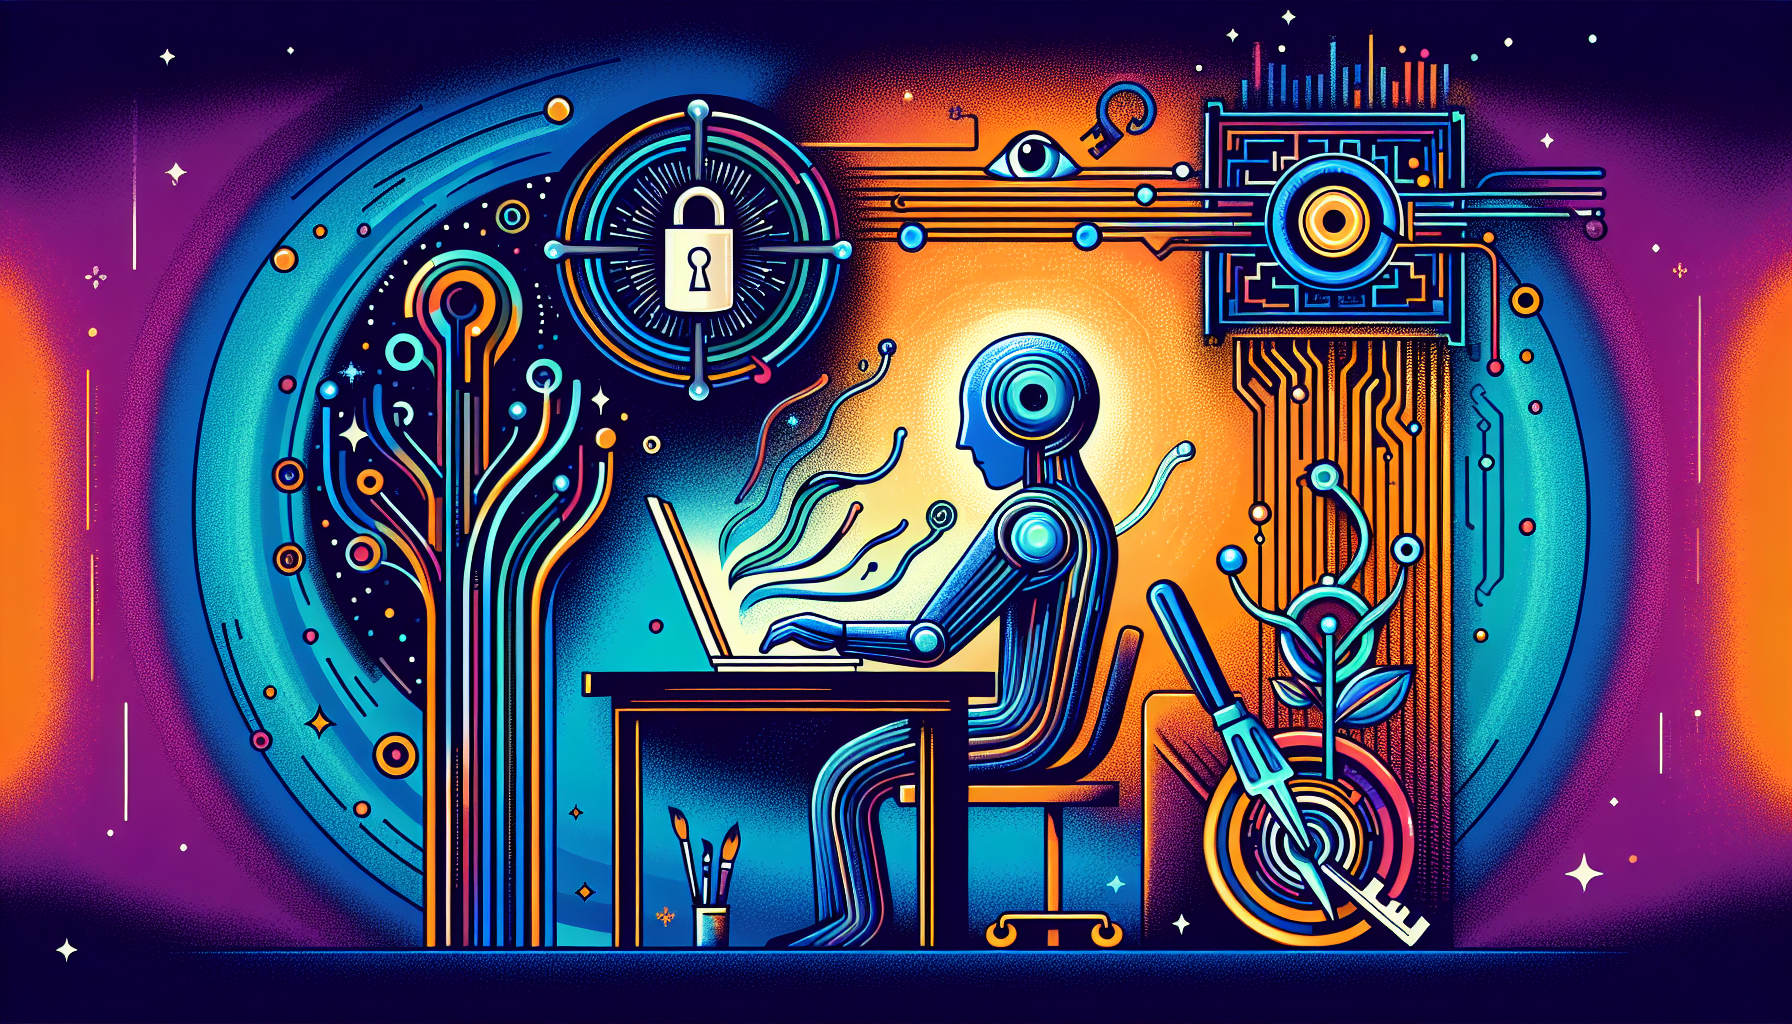 Create a vibrant, modernized illustration representing the theme of 'Unlocking Creativity' and 'The Advantages of AI in Screenwriting'. This could include symbolic elements such as a humanoid figure working on a futuristic screen, electronic trails symbolizing AI algorithms and creativity being unlocked via a stylized key or lock. No written symbols or text should be in the image.